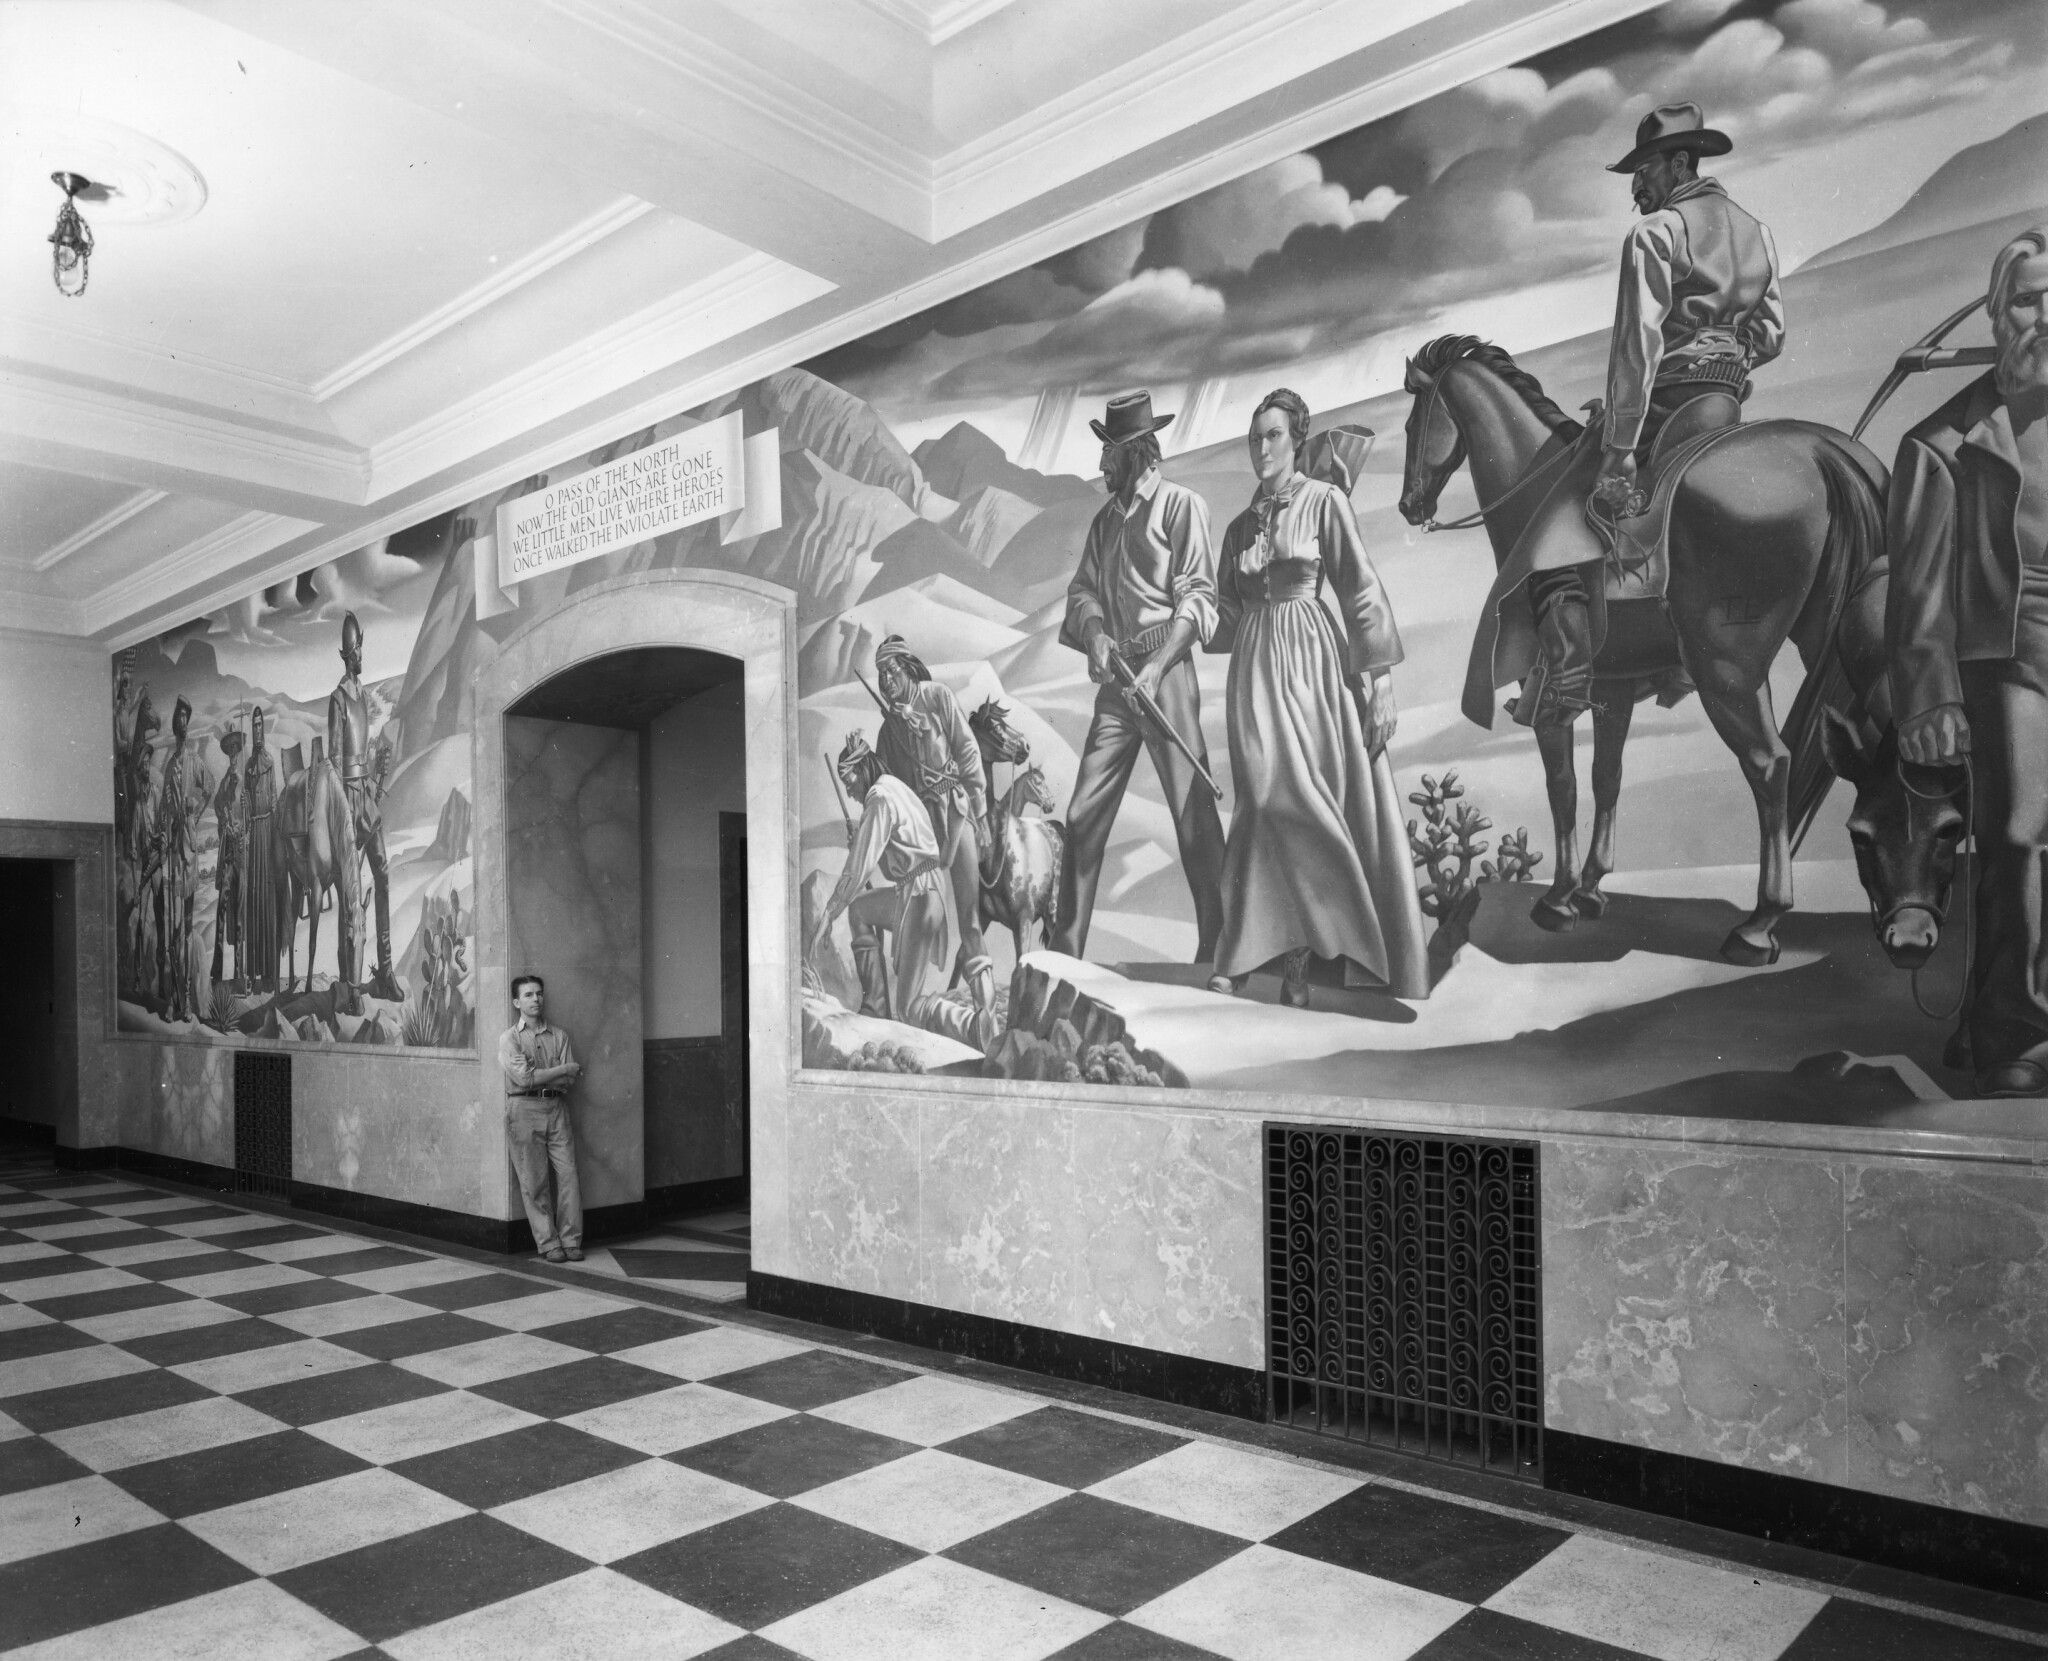 Tom Lea standing in front of the Pass of the North mural